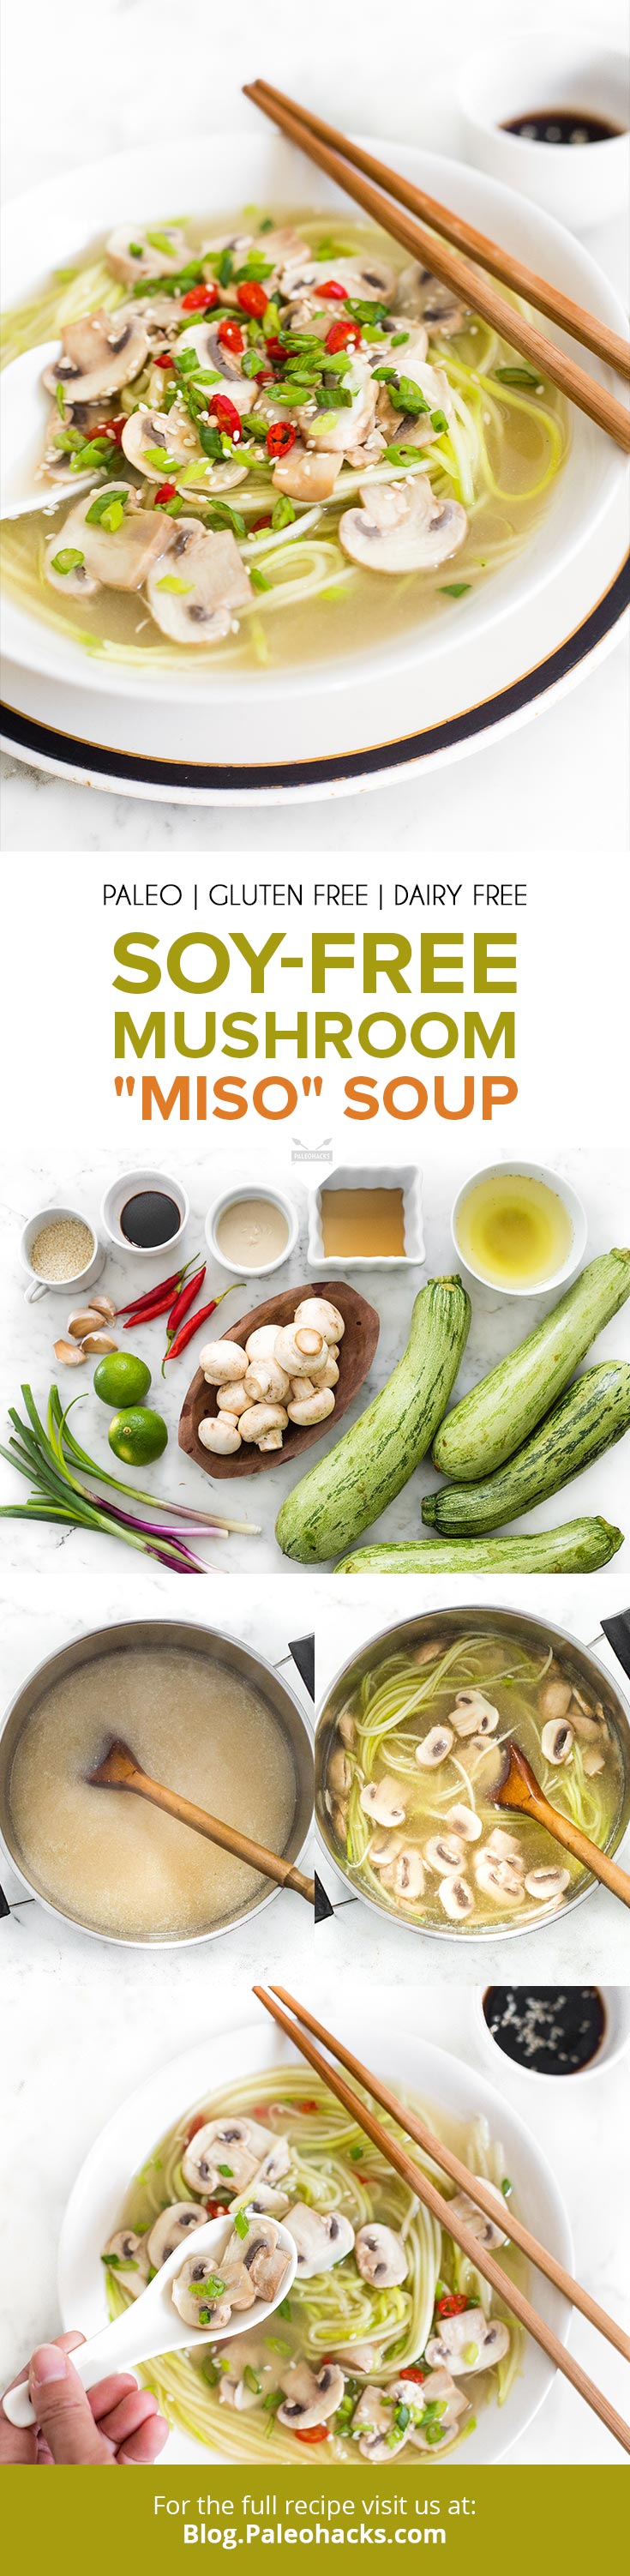 Whip up this soy-free mushroom “miso” soup for a Paleo-friendly dish that looks and tastes like the real deal.